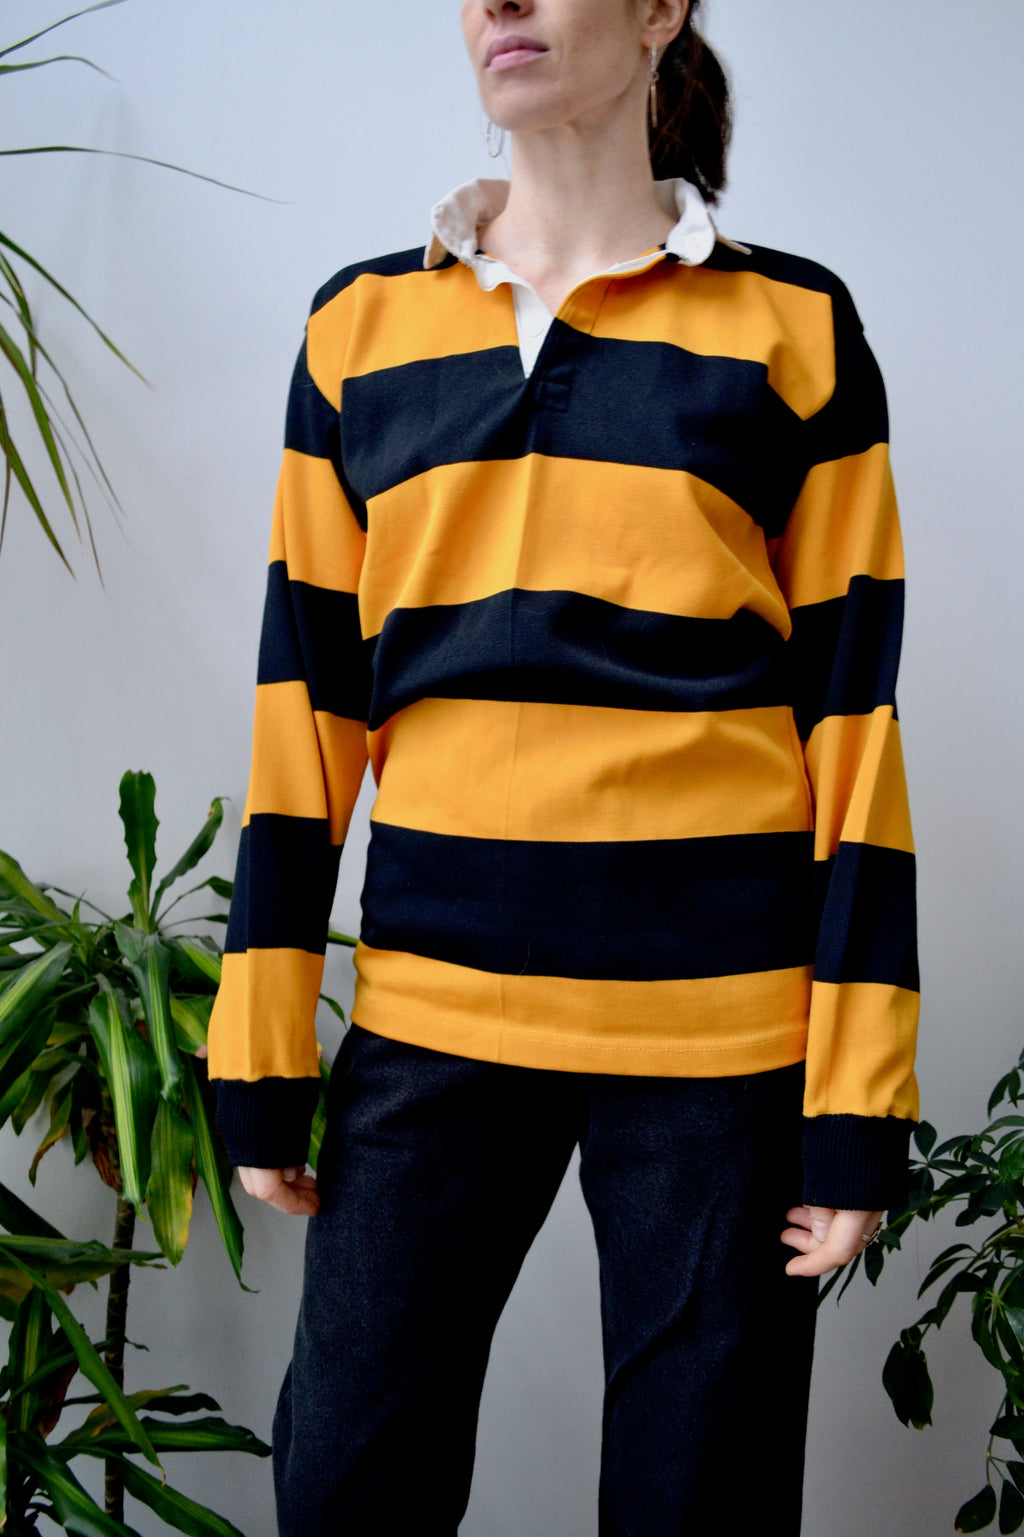 Bumble Bee Rugby Shirt